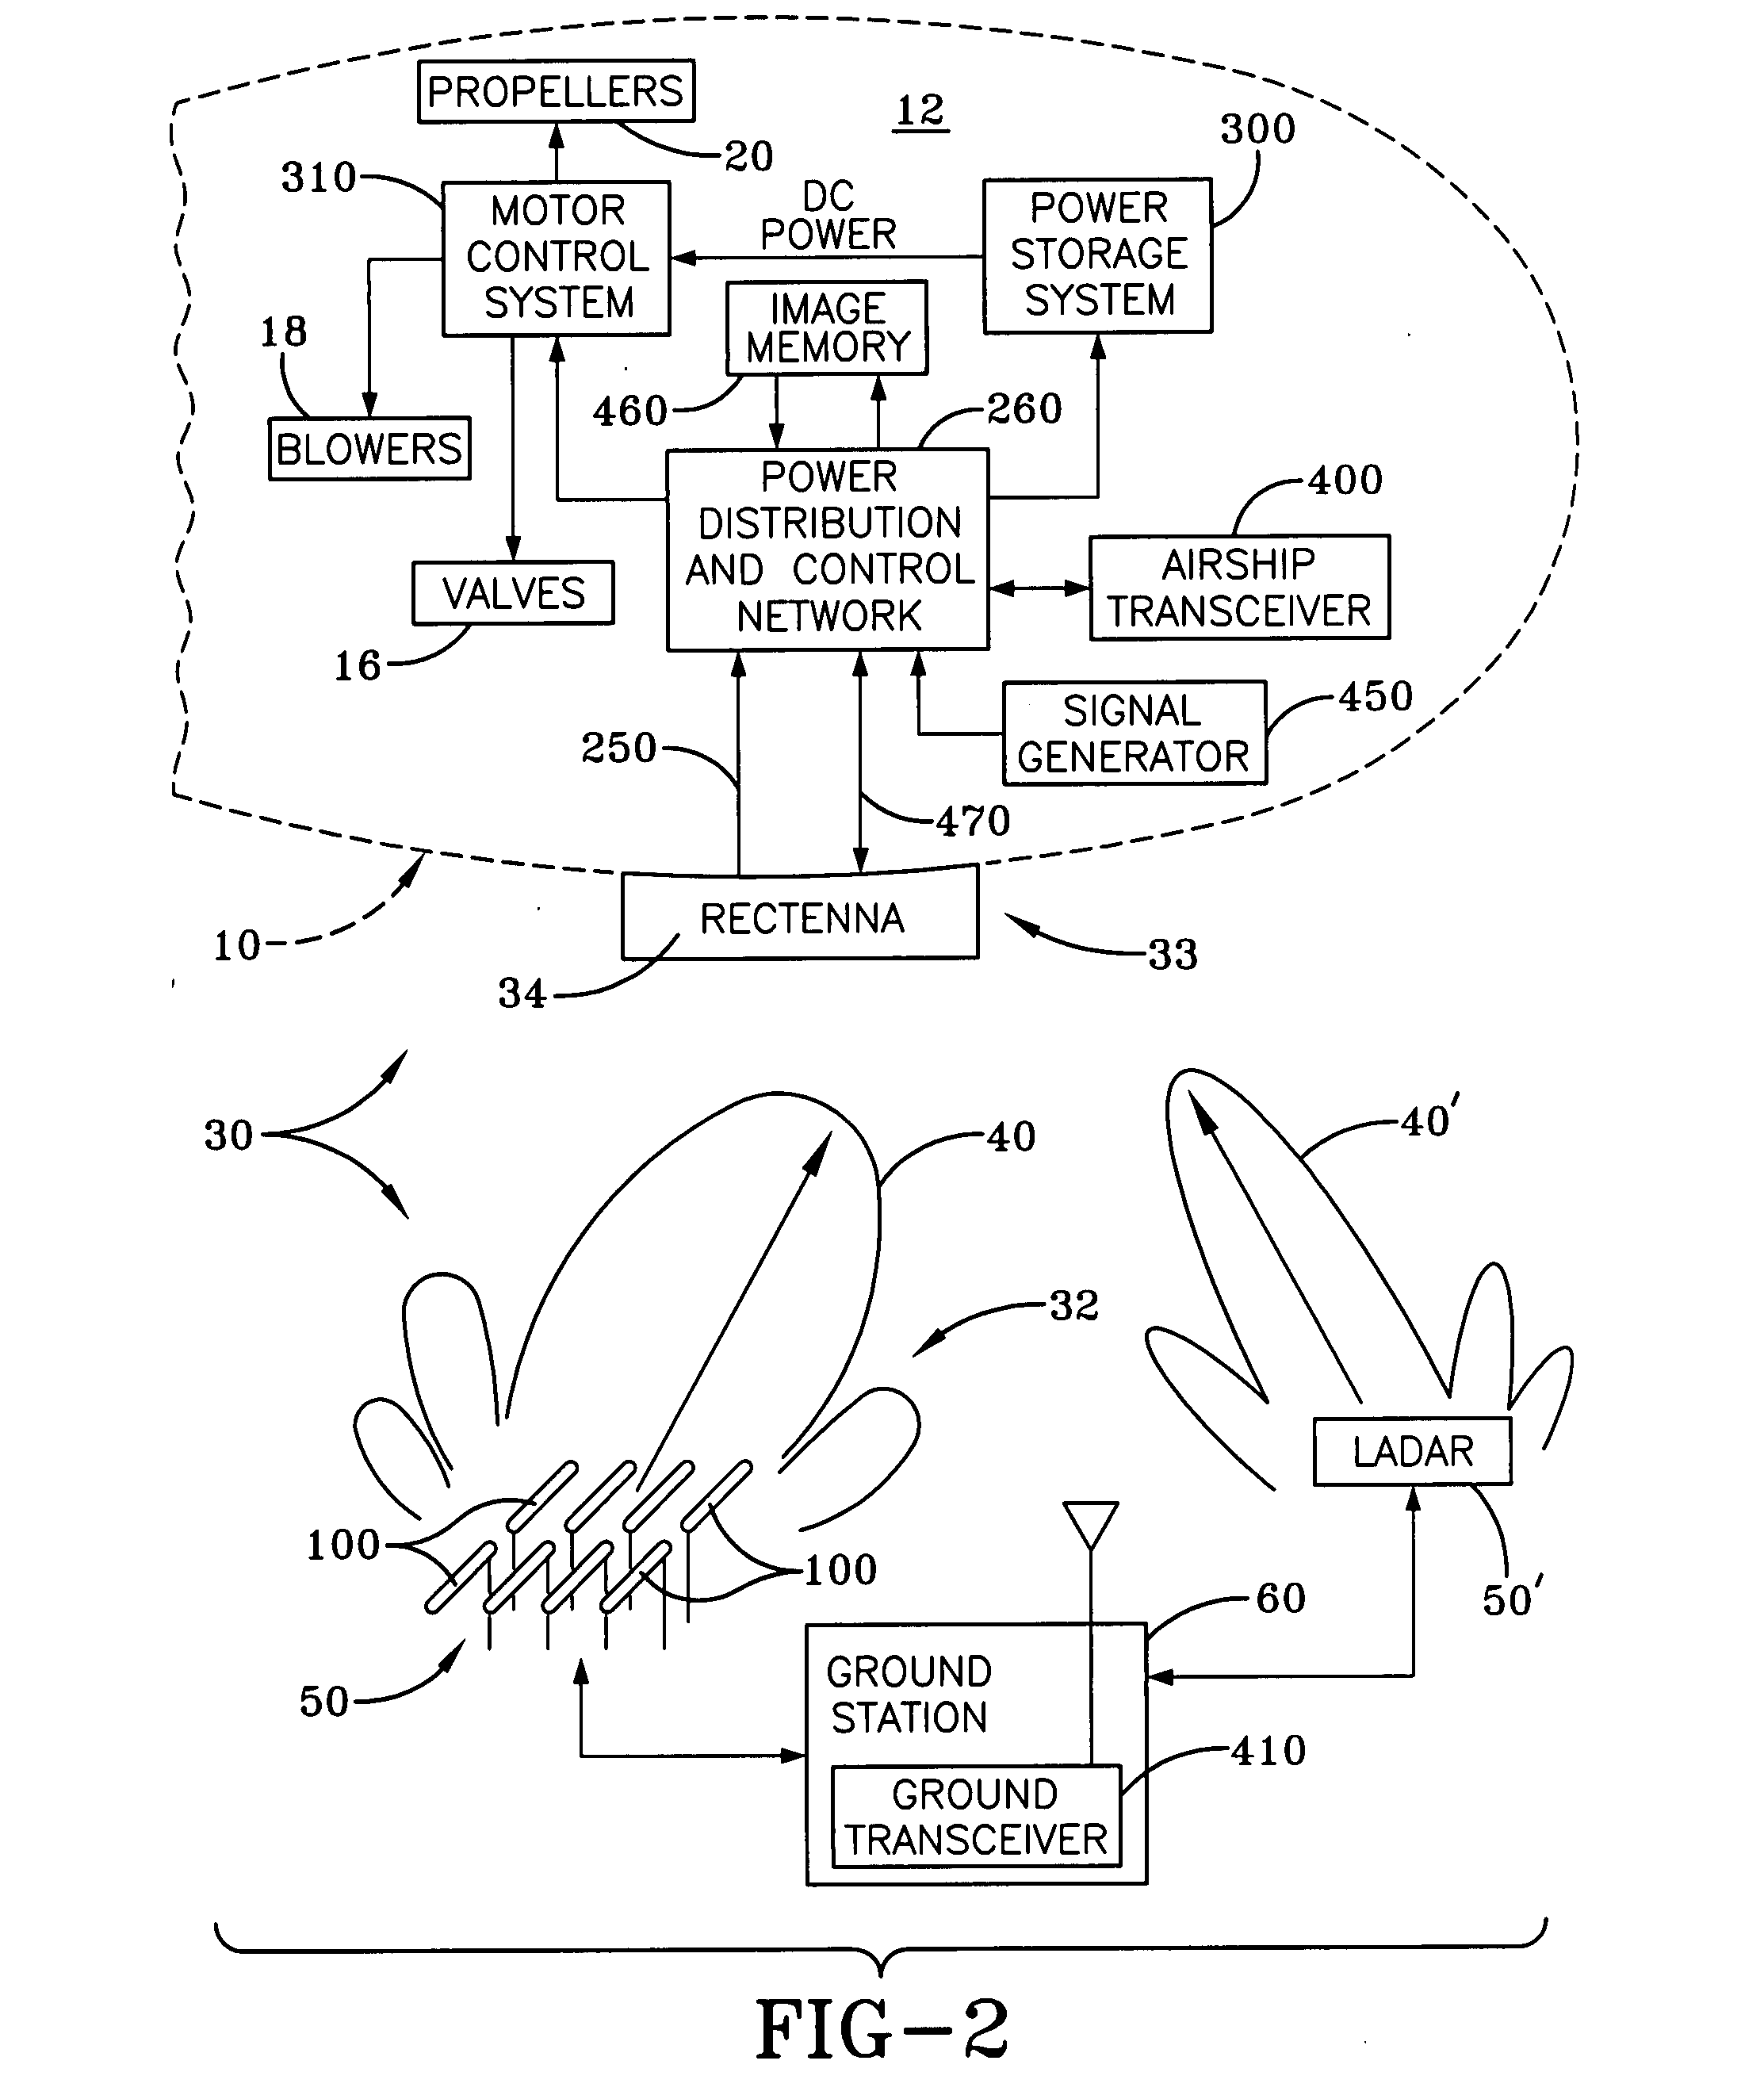 Power and imaging system for an airship